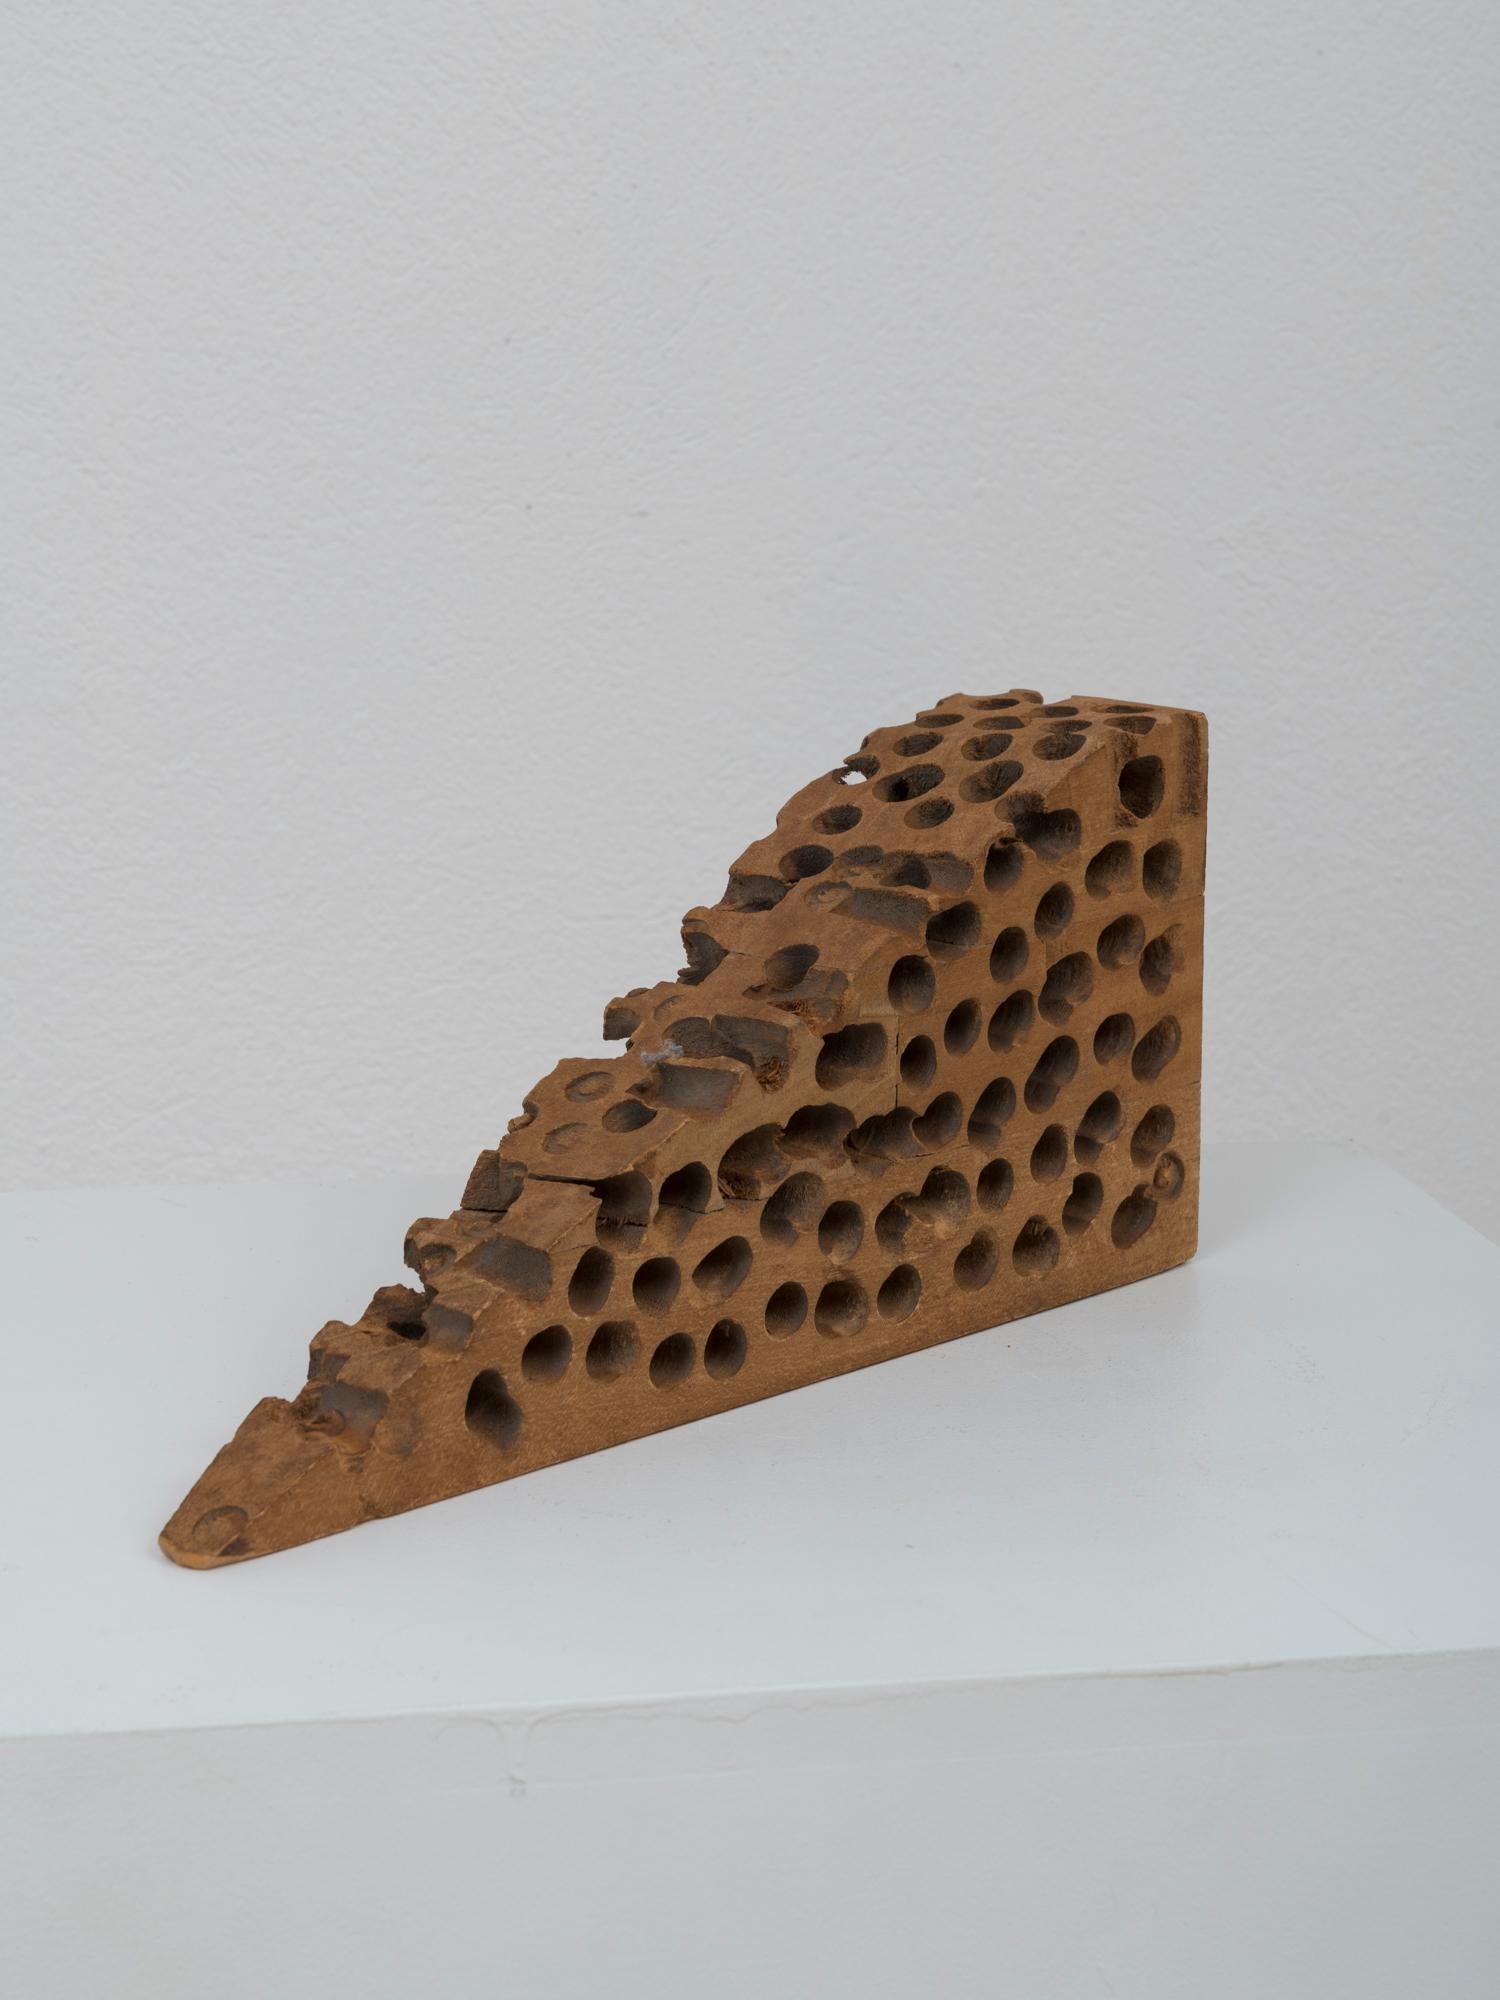 Post-Modern “Forma di Maggio” Hand-Carved Wood Radical Sculpture by Urano Palma 1978 For Sale